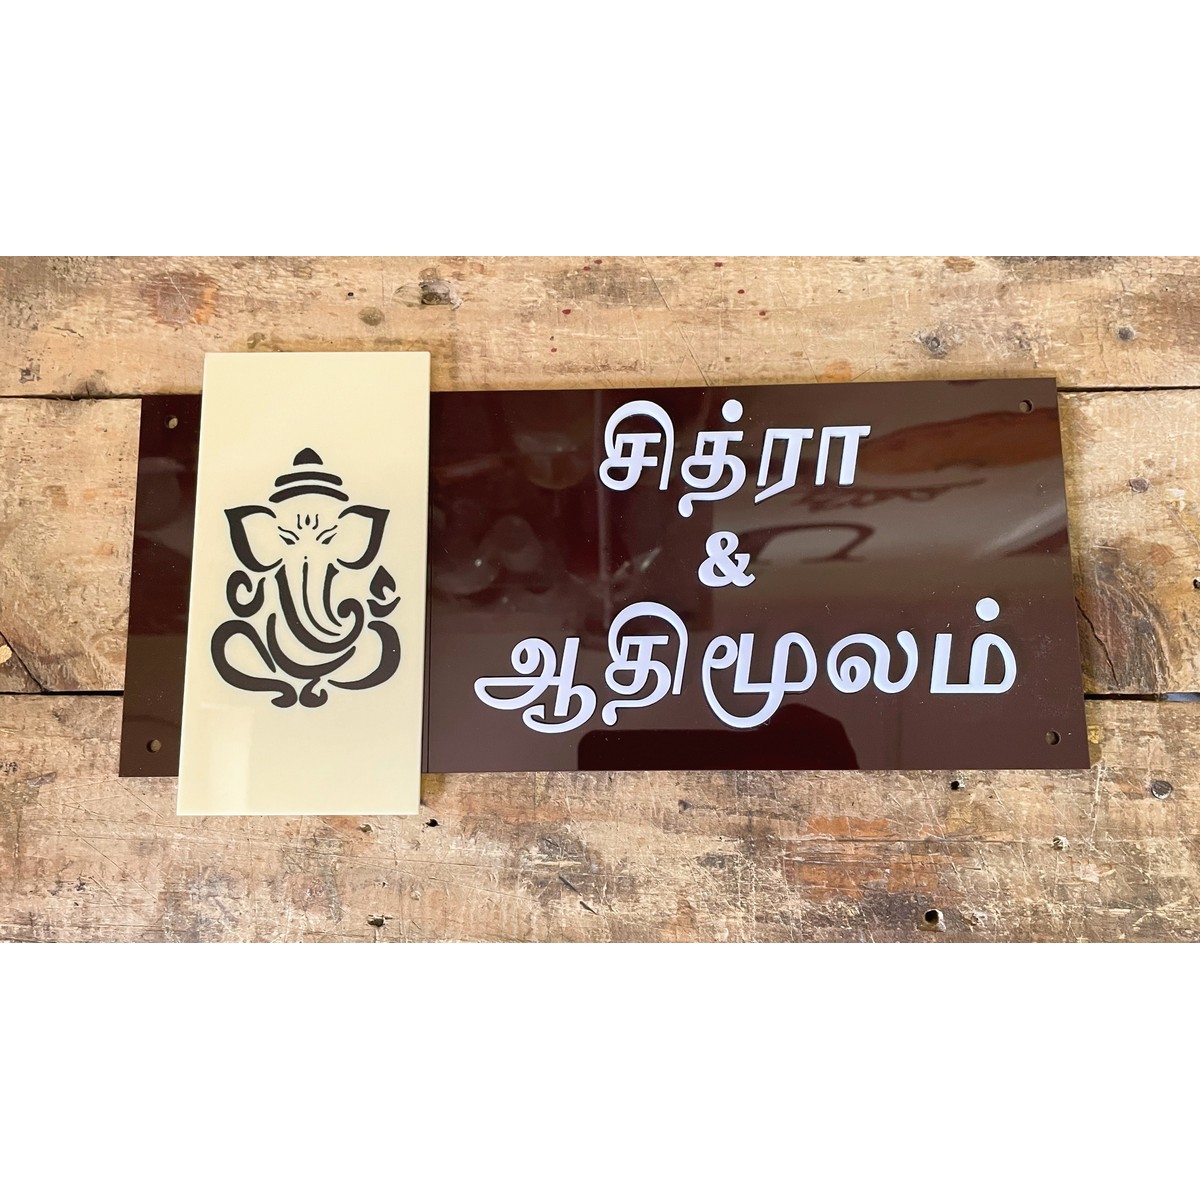 Metal Letters In Chennai